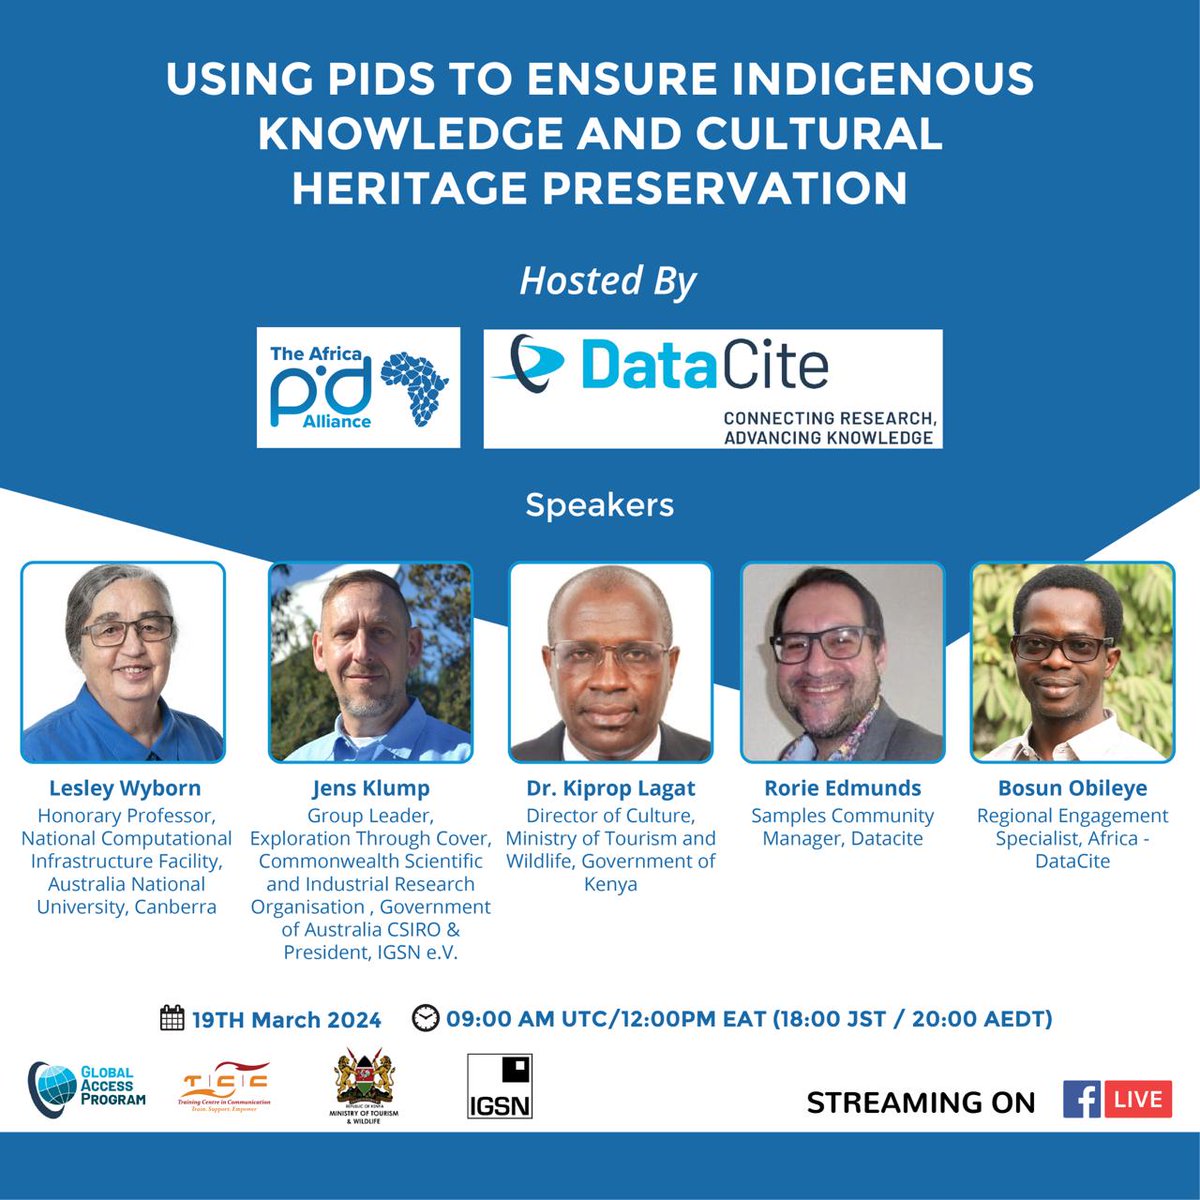 📣#Webinar #Invitation by @Datacite and @AfricaPid #MeetTheSpeakers from @PsHeritage & @igsn_info How do we use #PIDs to preserve African cultural heritage and indigenous knowledge? 🔷Register here to find out us02web.zoom.us/meeting/regist…